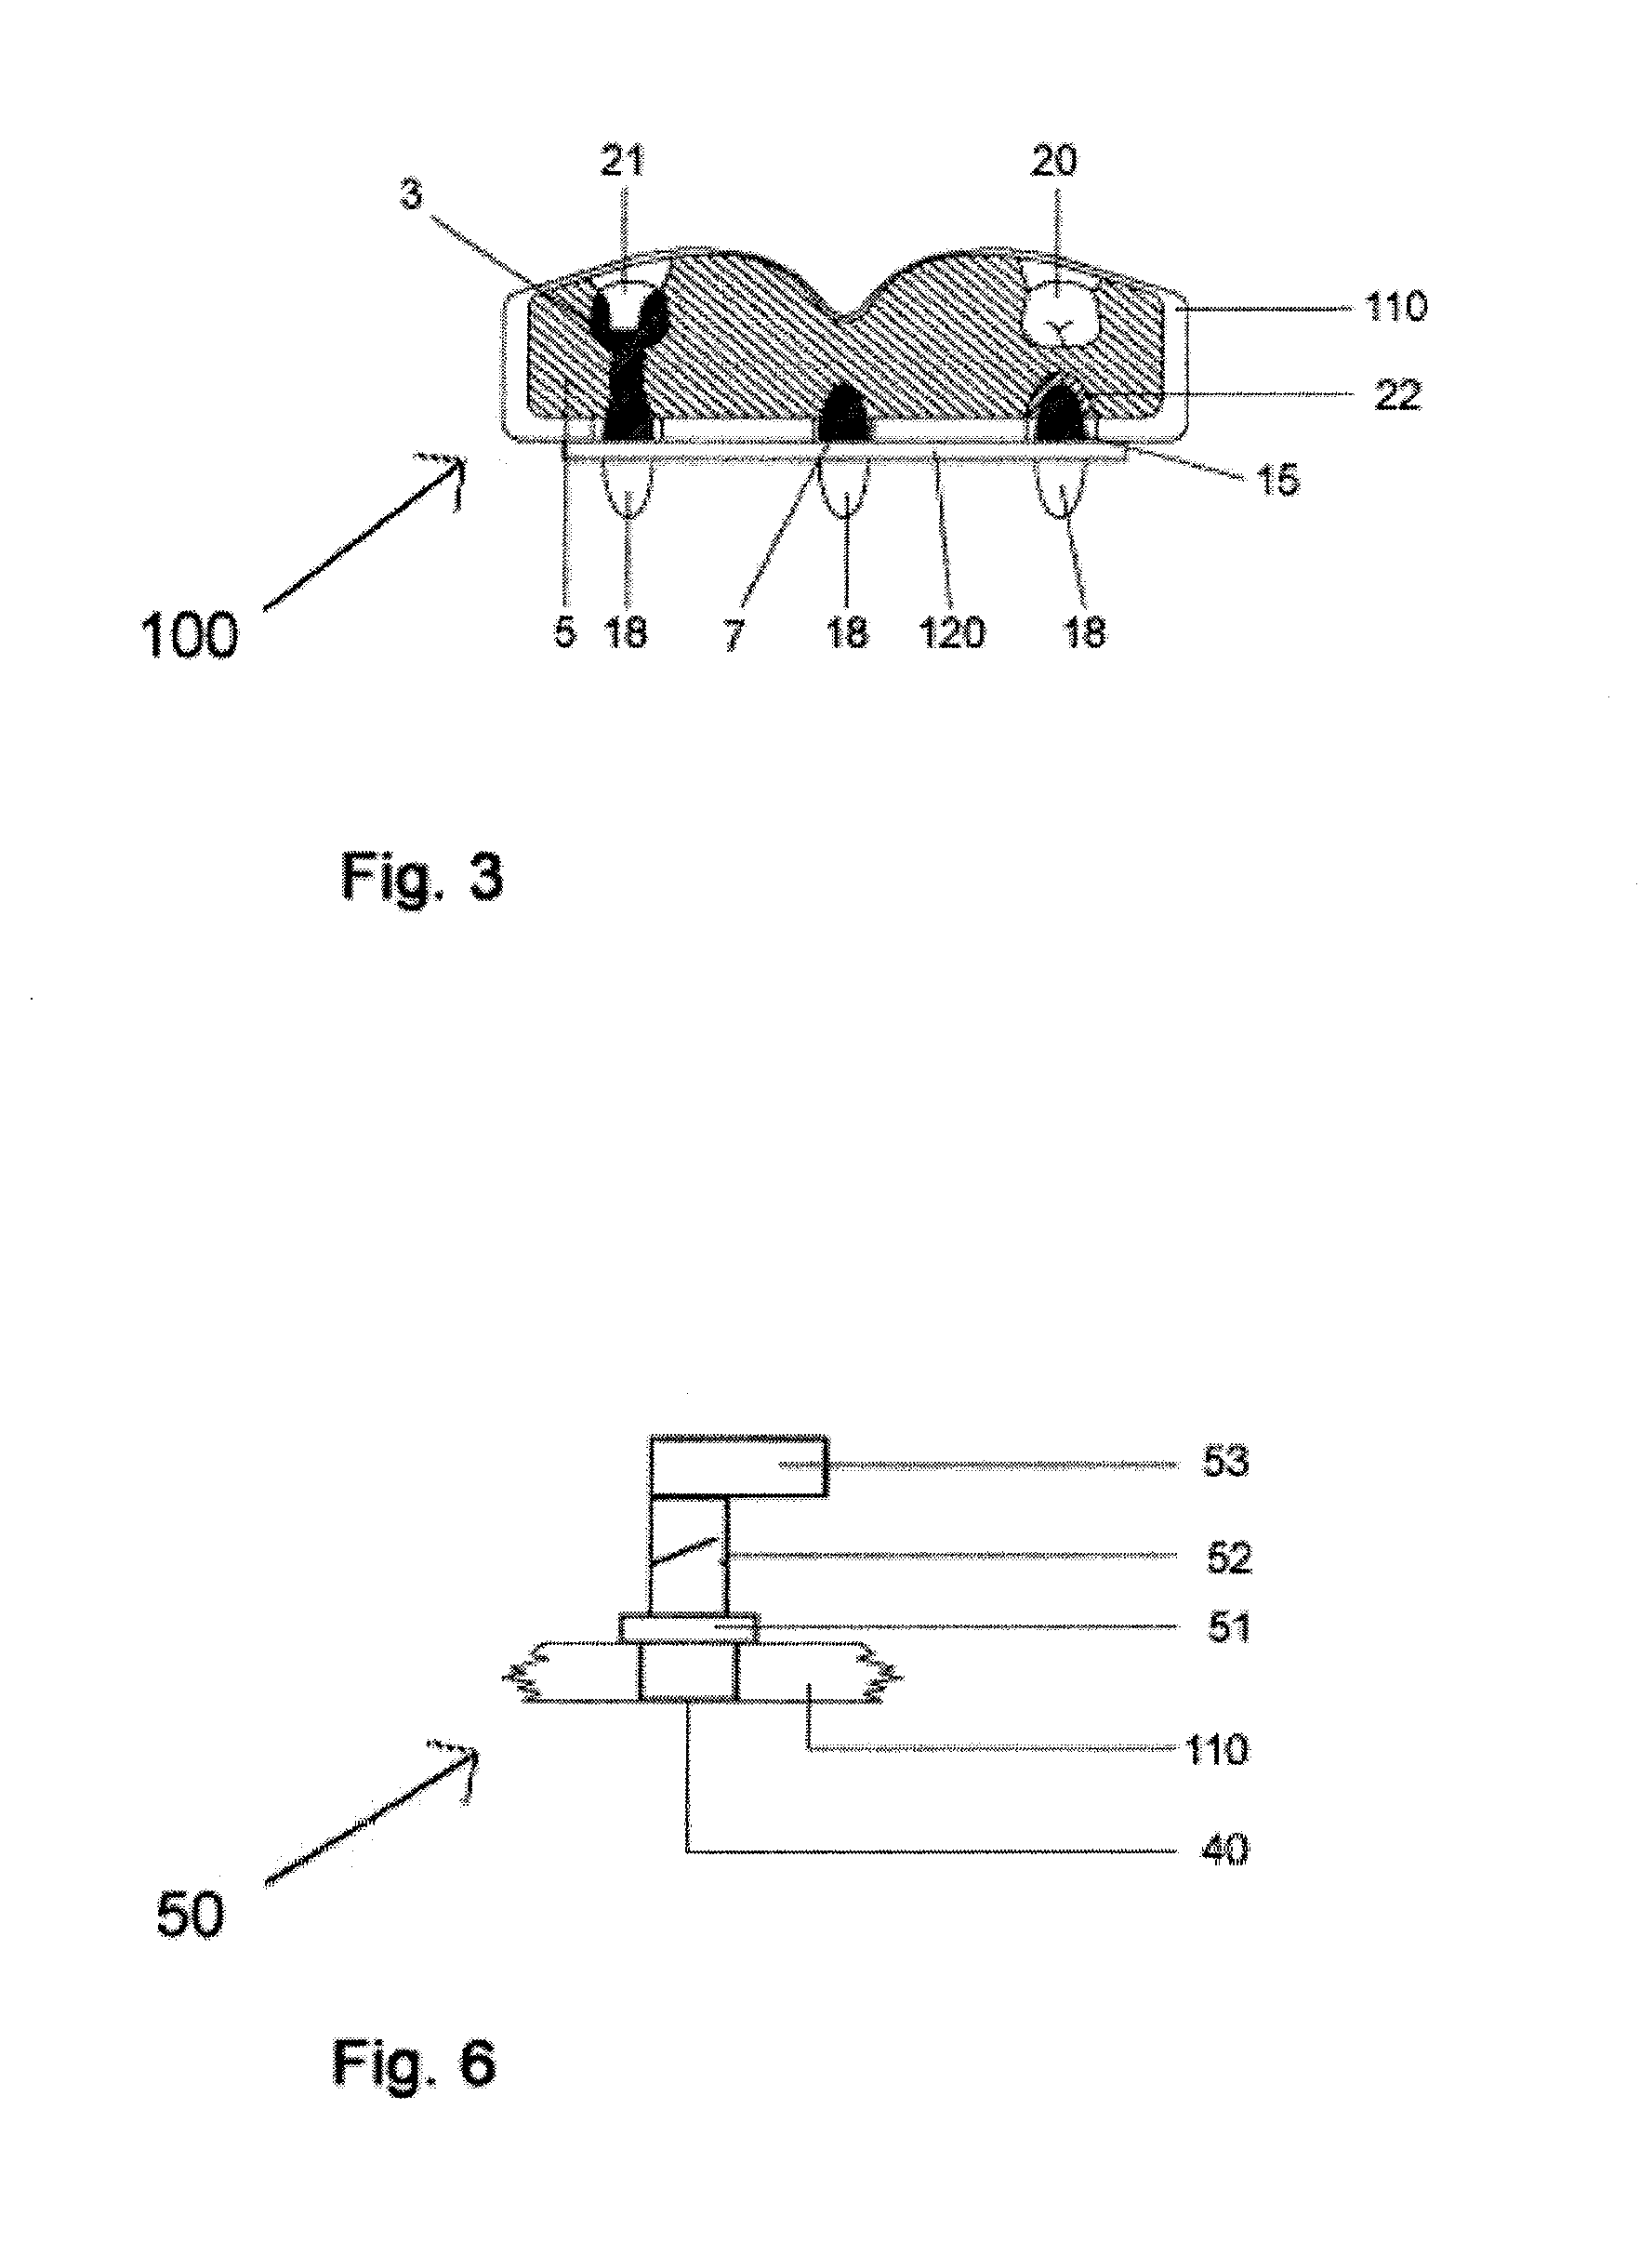 Apparatus for Producing Dental Impressions